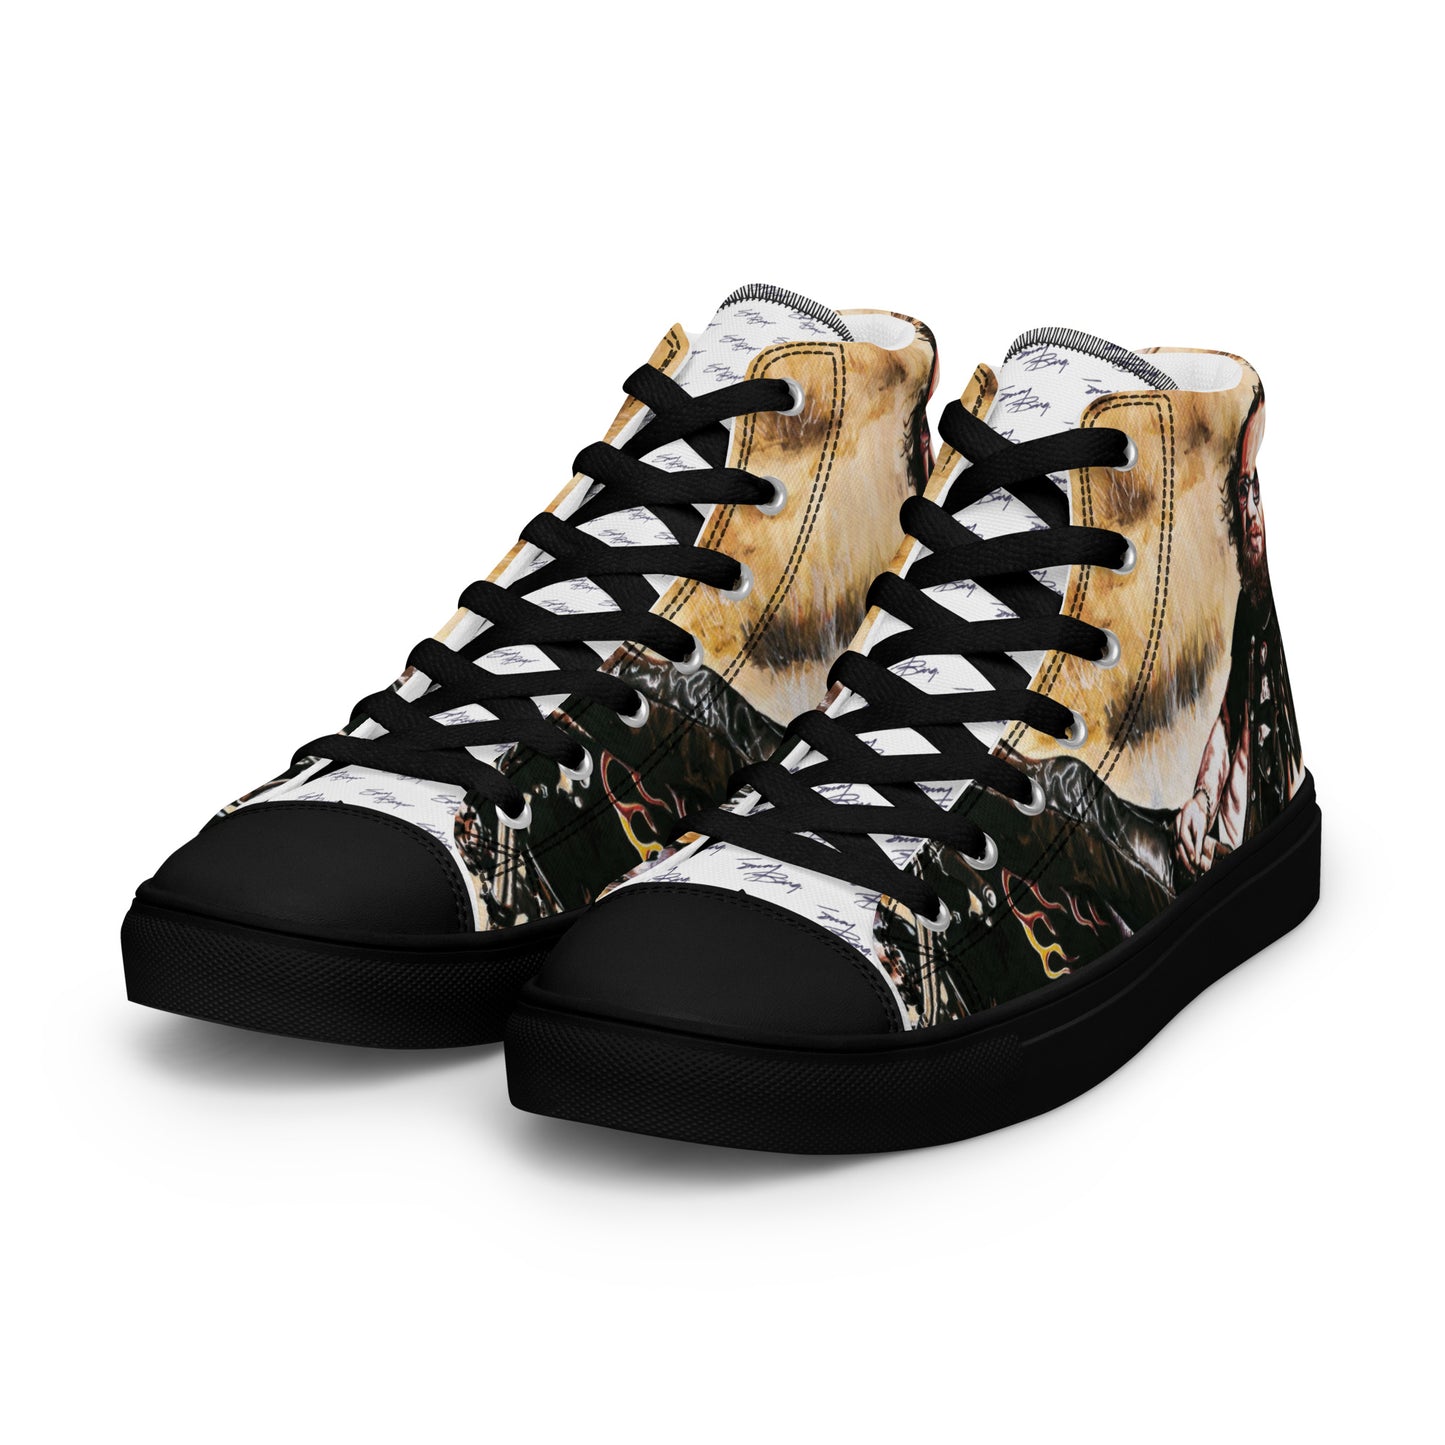 Sonny's Women’s high top canvas shoes-2 colors available